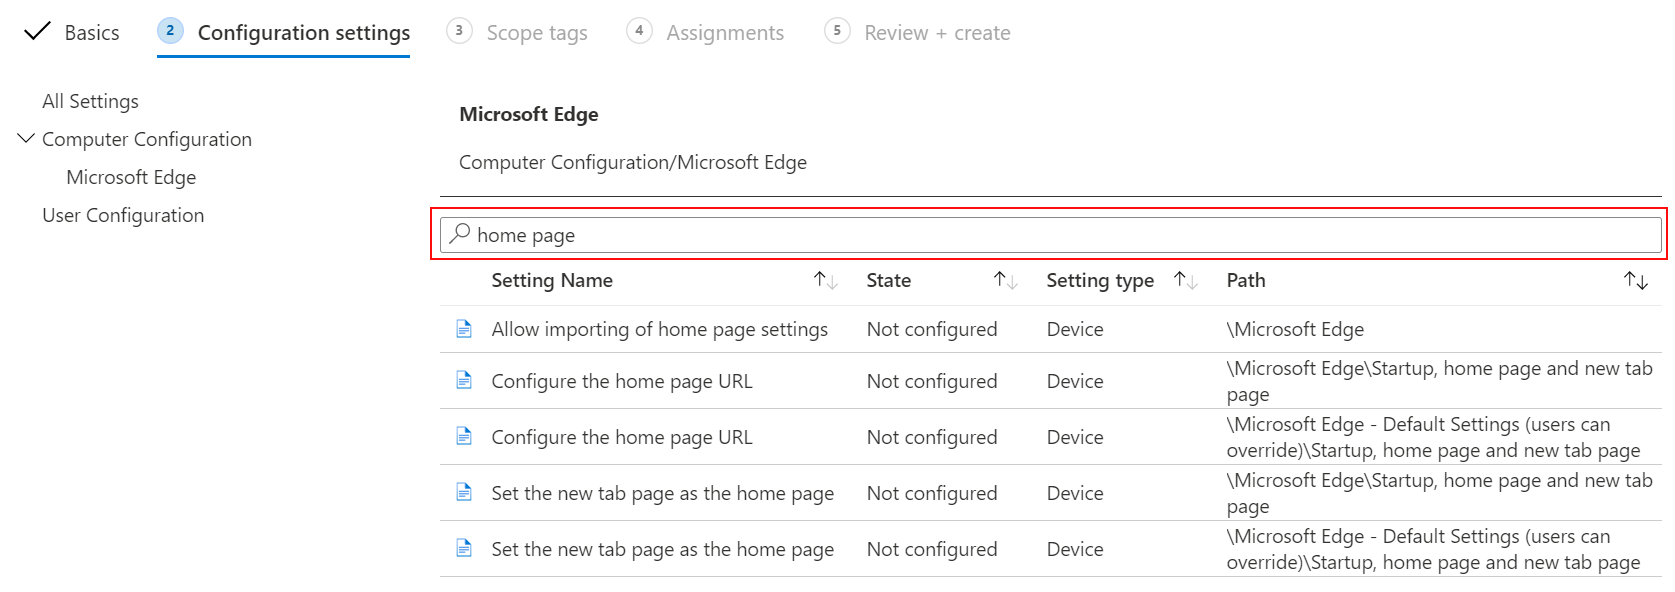 Use the search to filter ADMX settings in Microsoft Intune and Intune admin center.